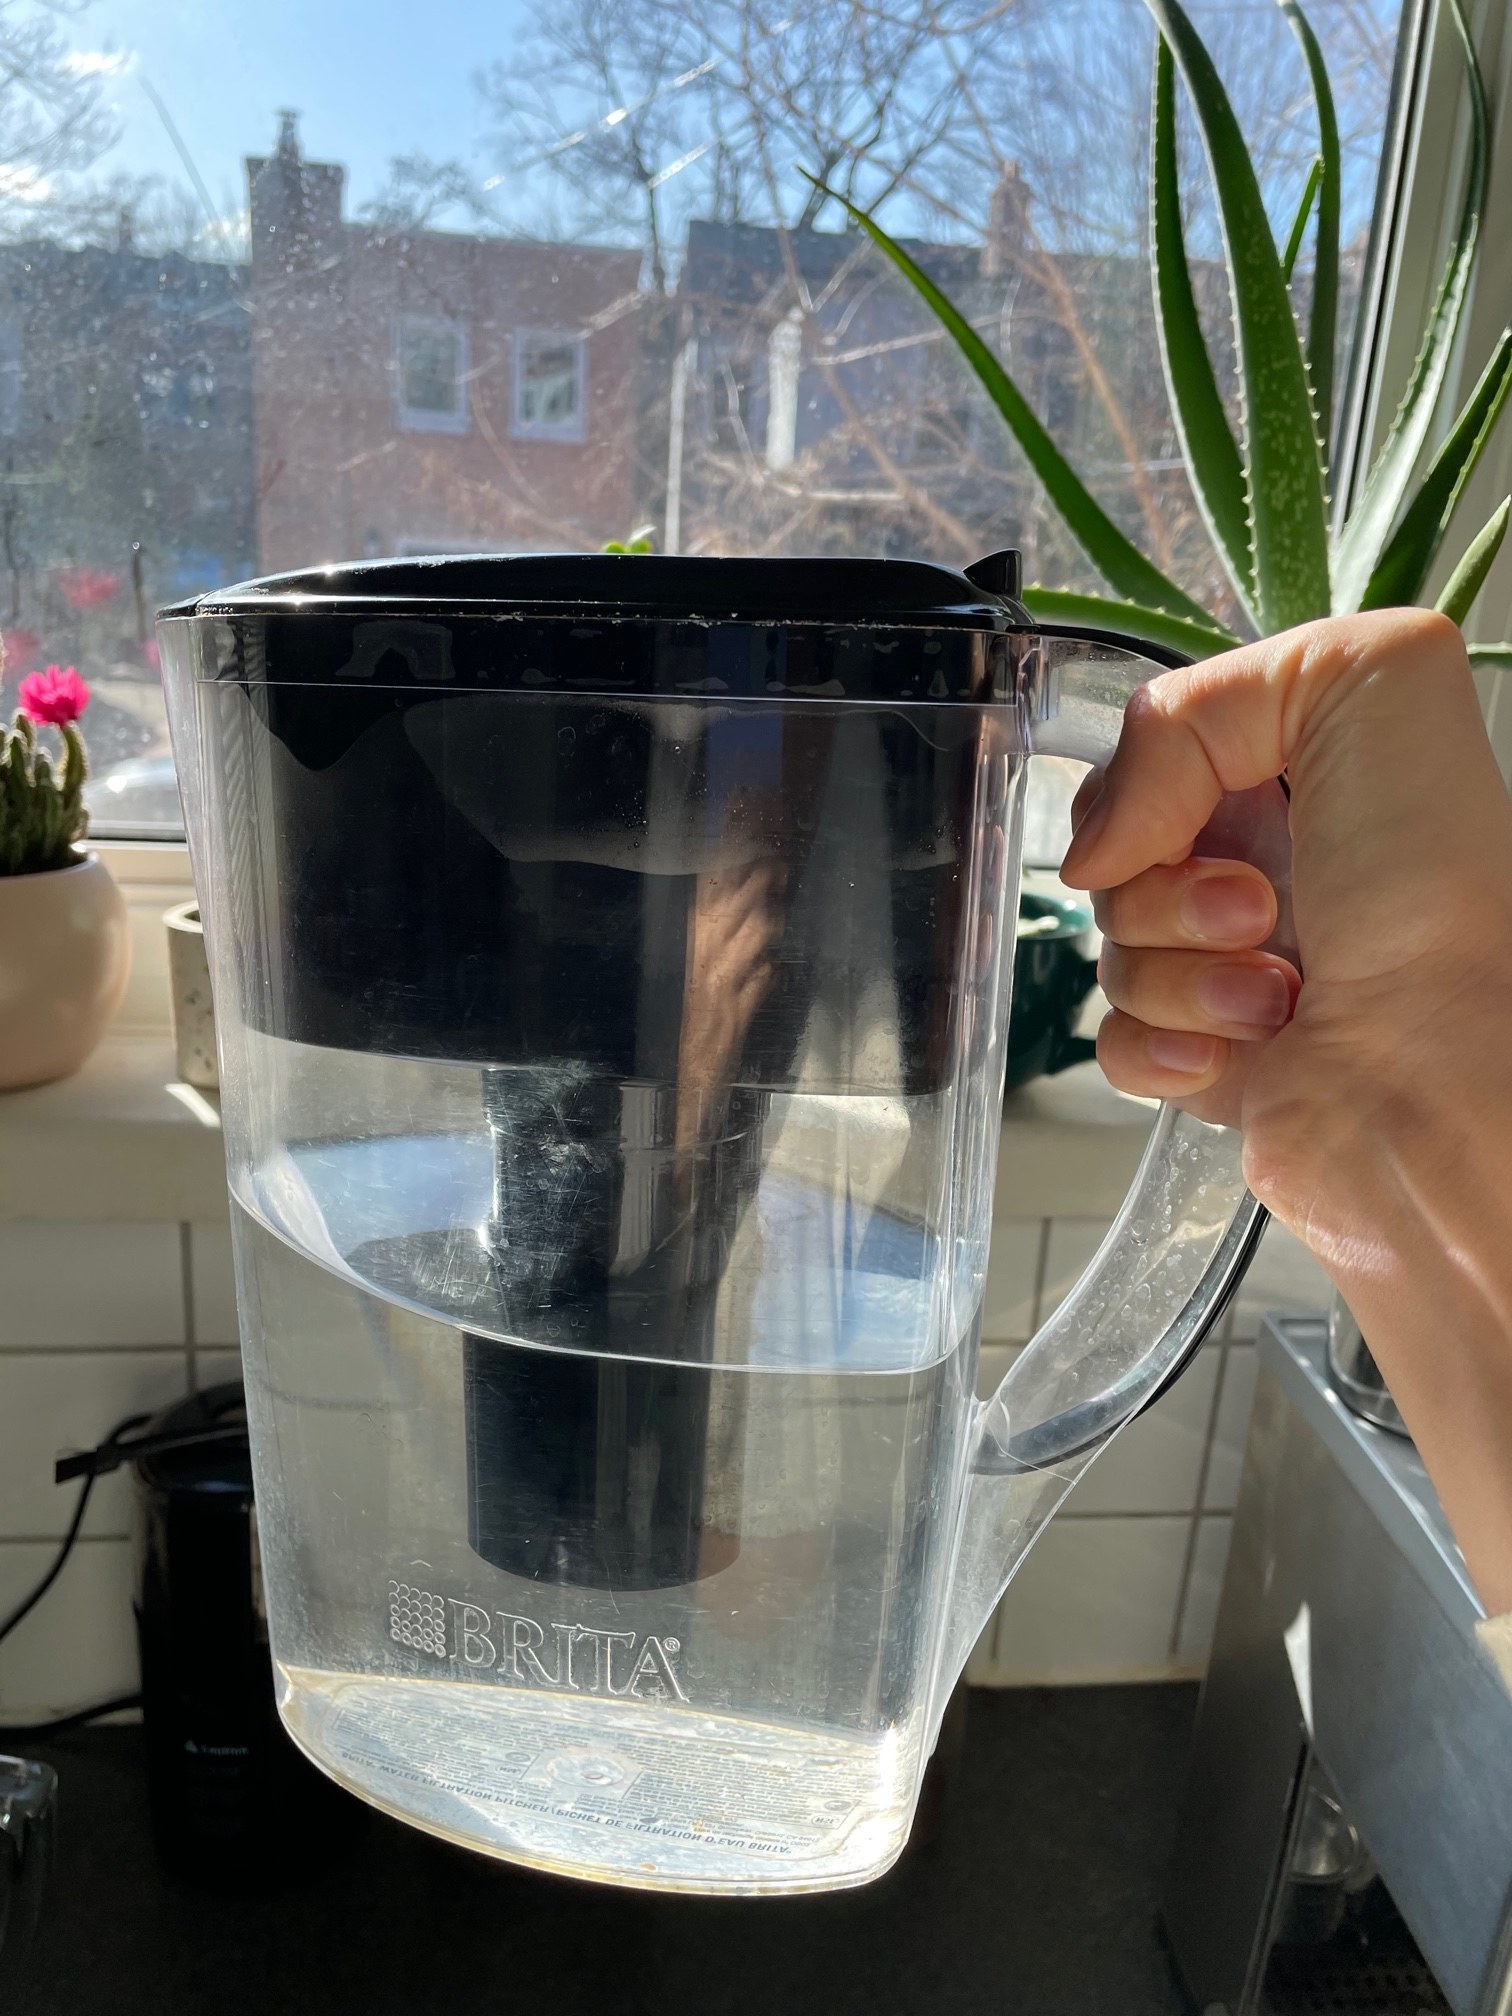 Brittany holding her Brita pitcher in front of a window